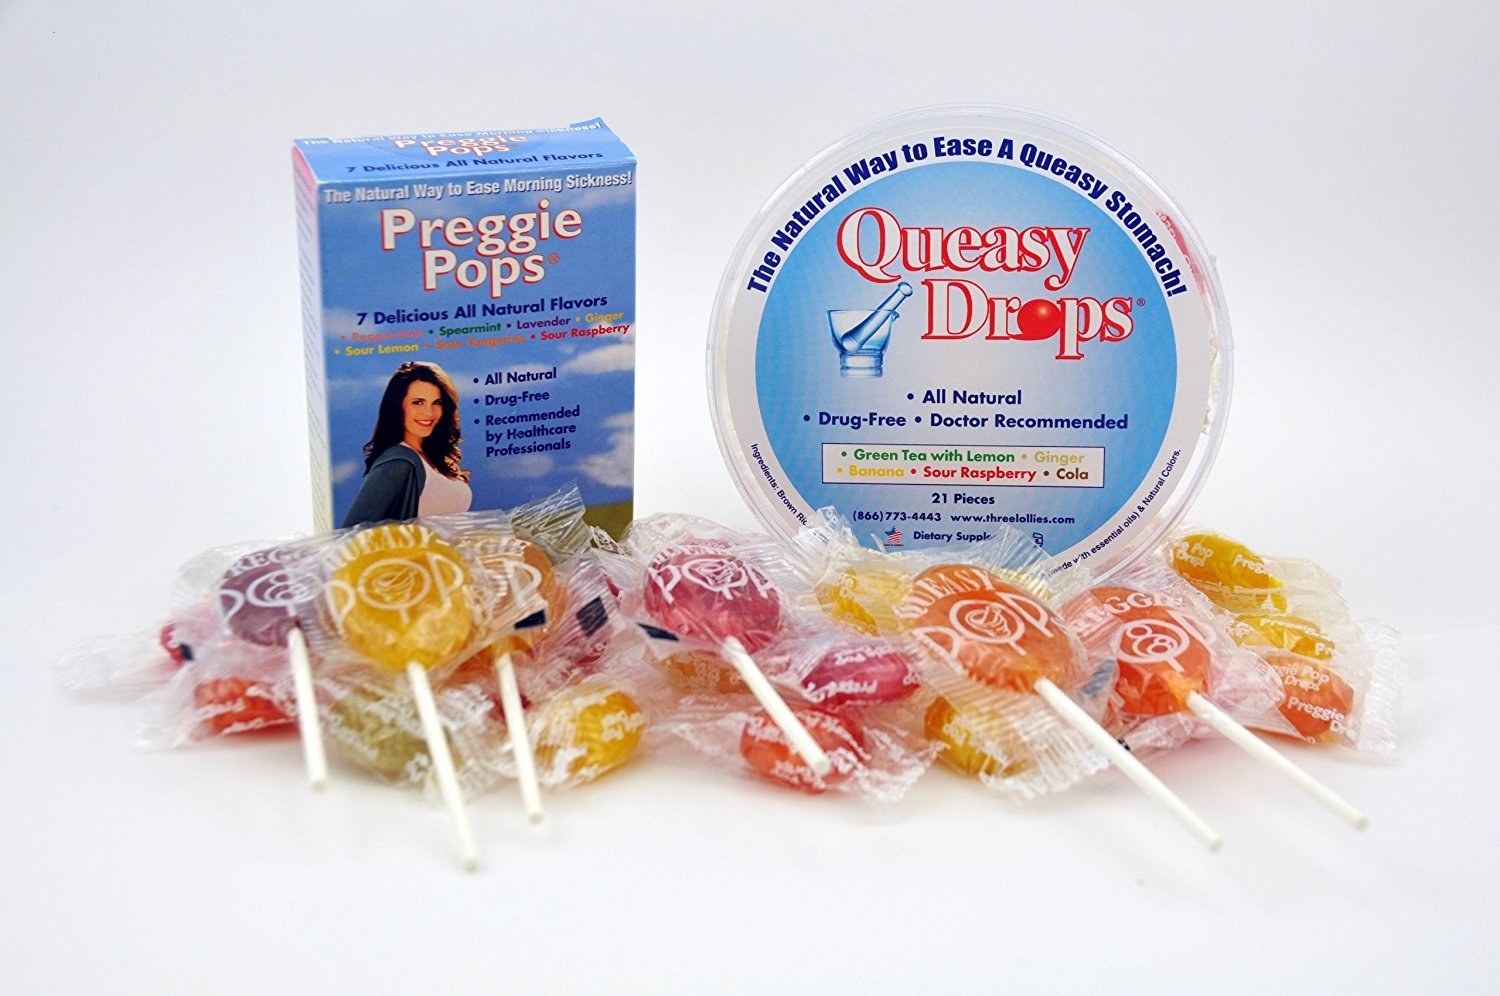 the candies wrapped in plastic